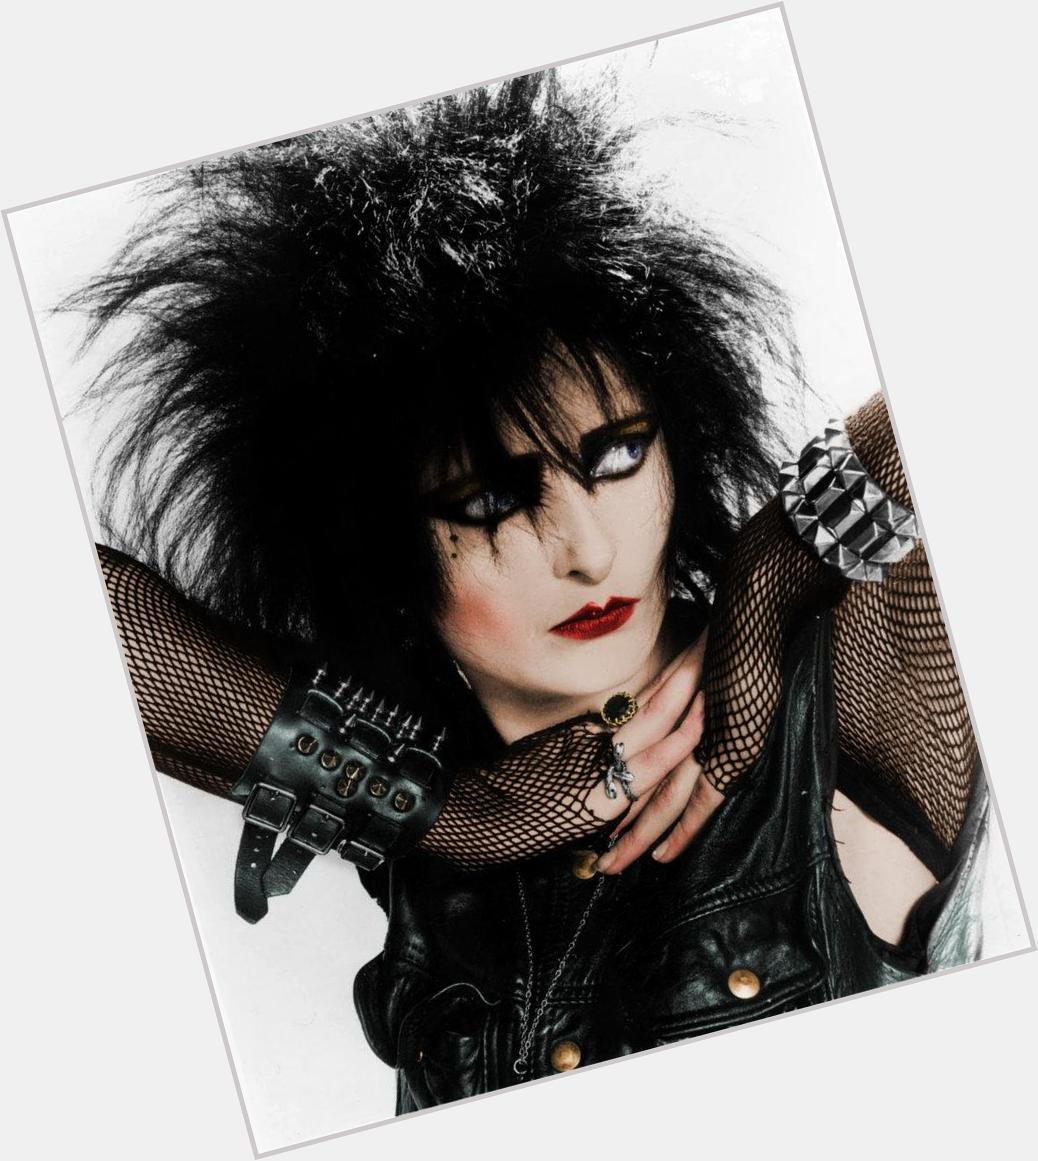 Happy 58th to Siouxsie Sioux! 